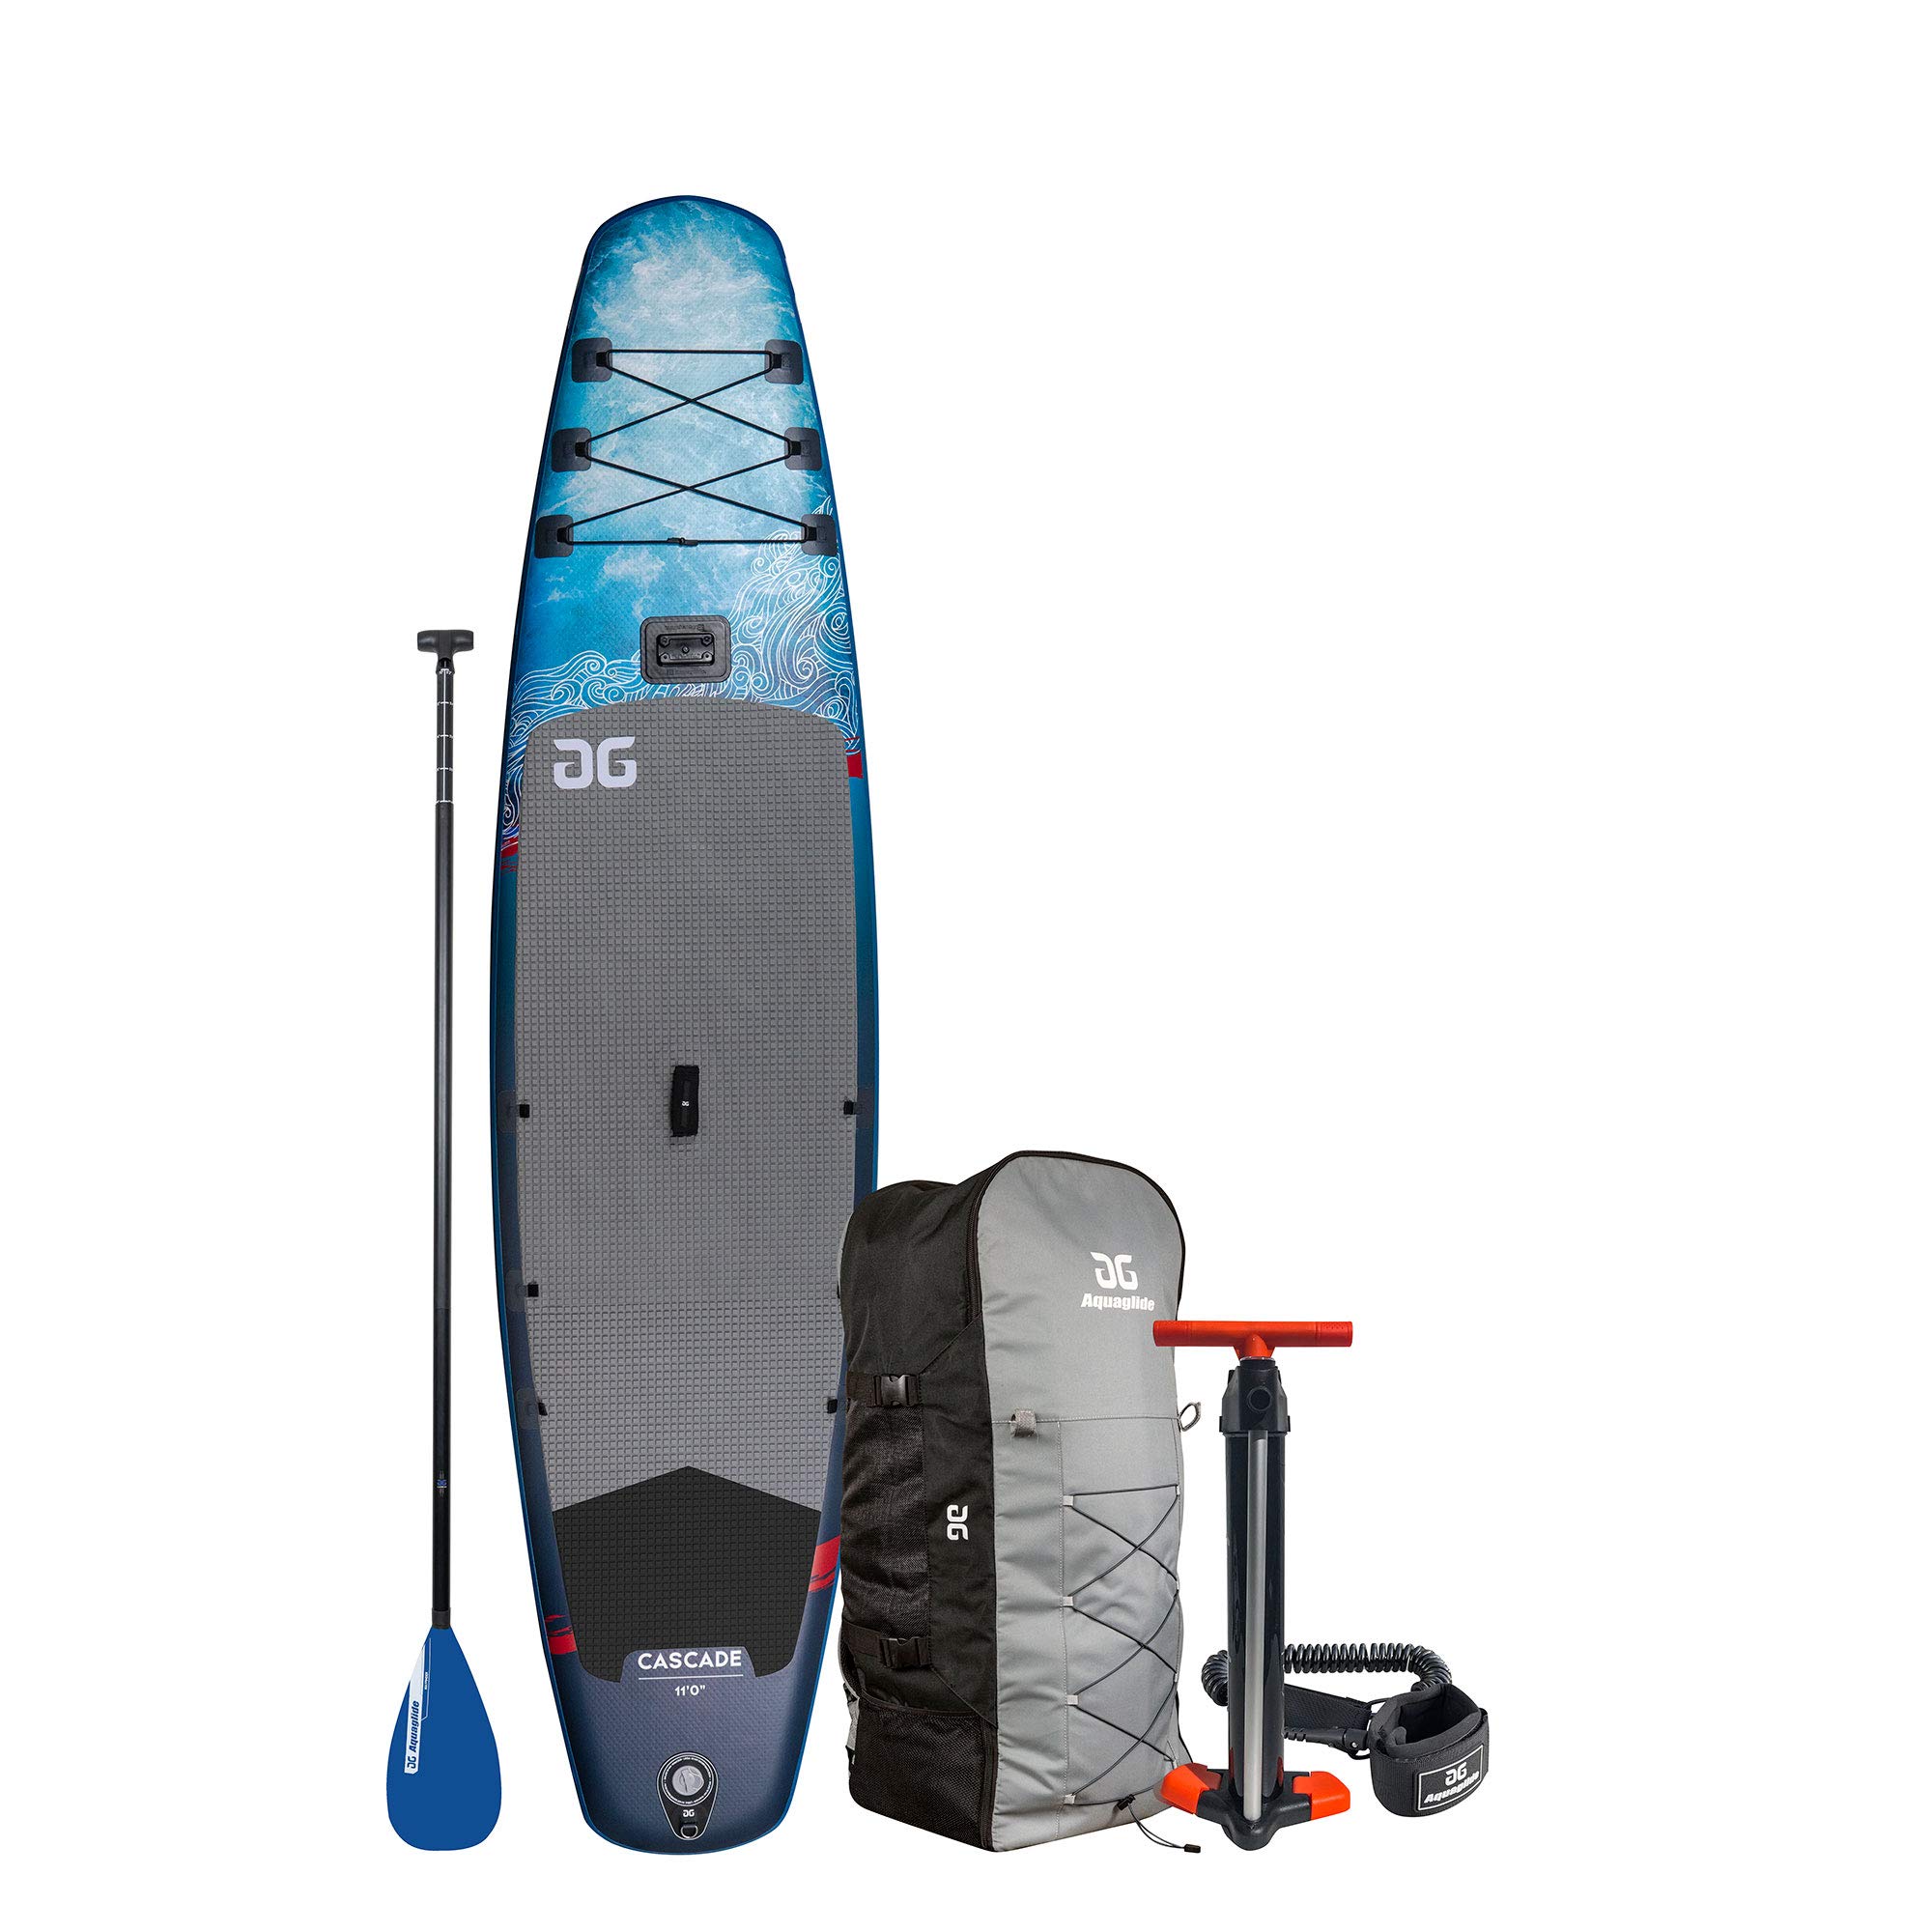 CASCADE 11FT SUP PACKAGE